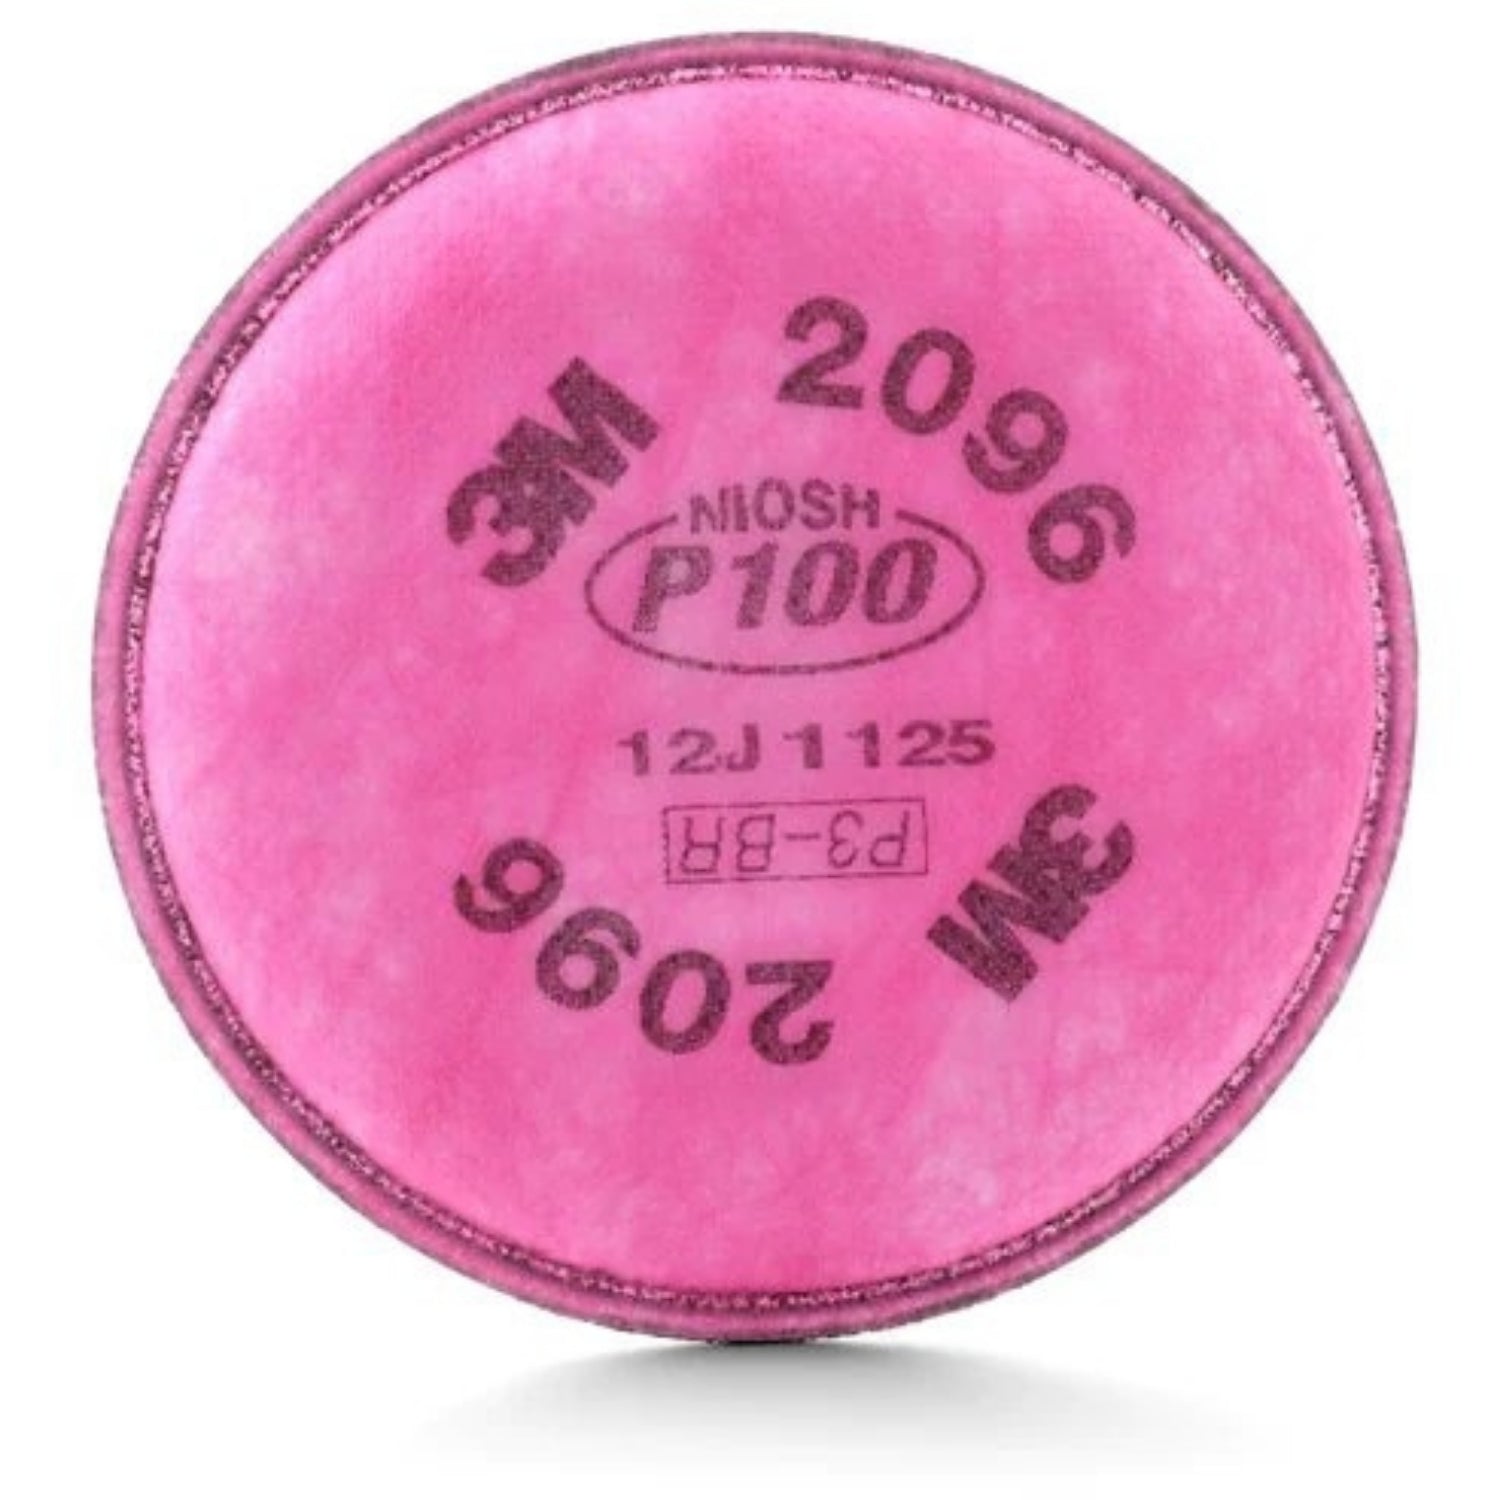 3M™ Particulate Filter 2096, P100, with Nuisance Level Acid Gas Relief - Magenta